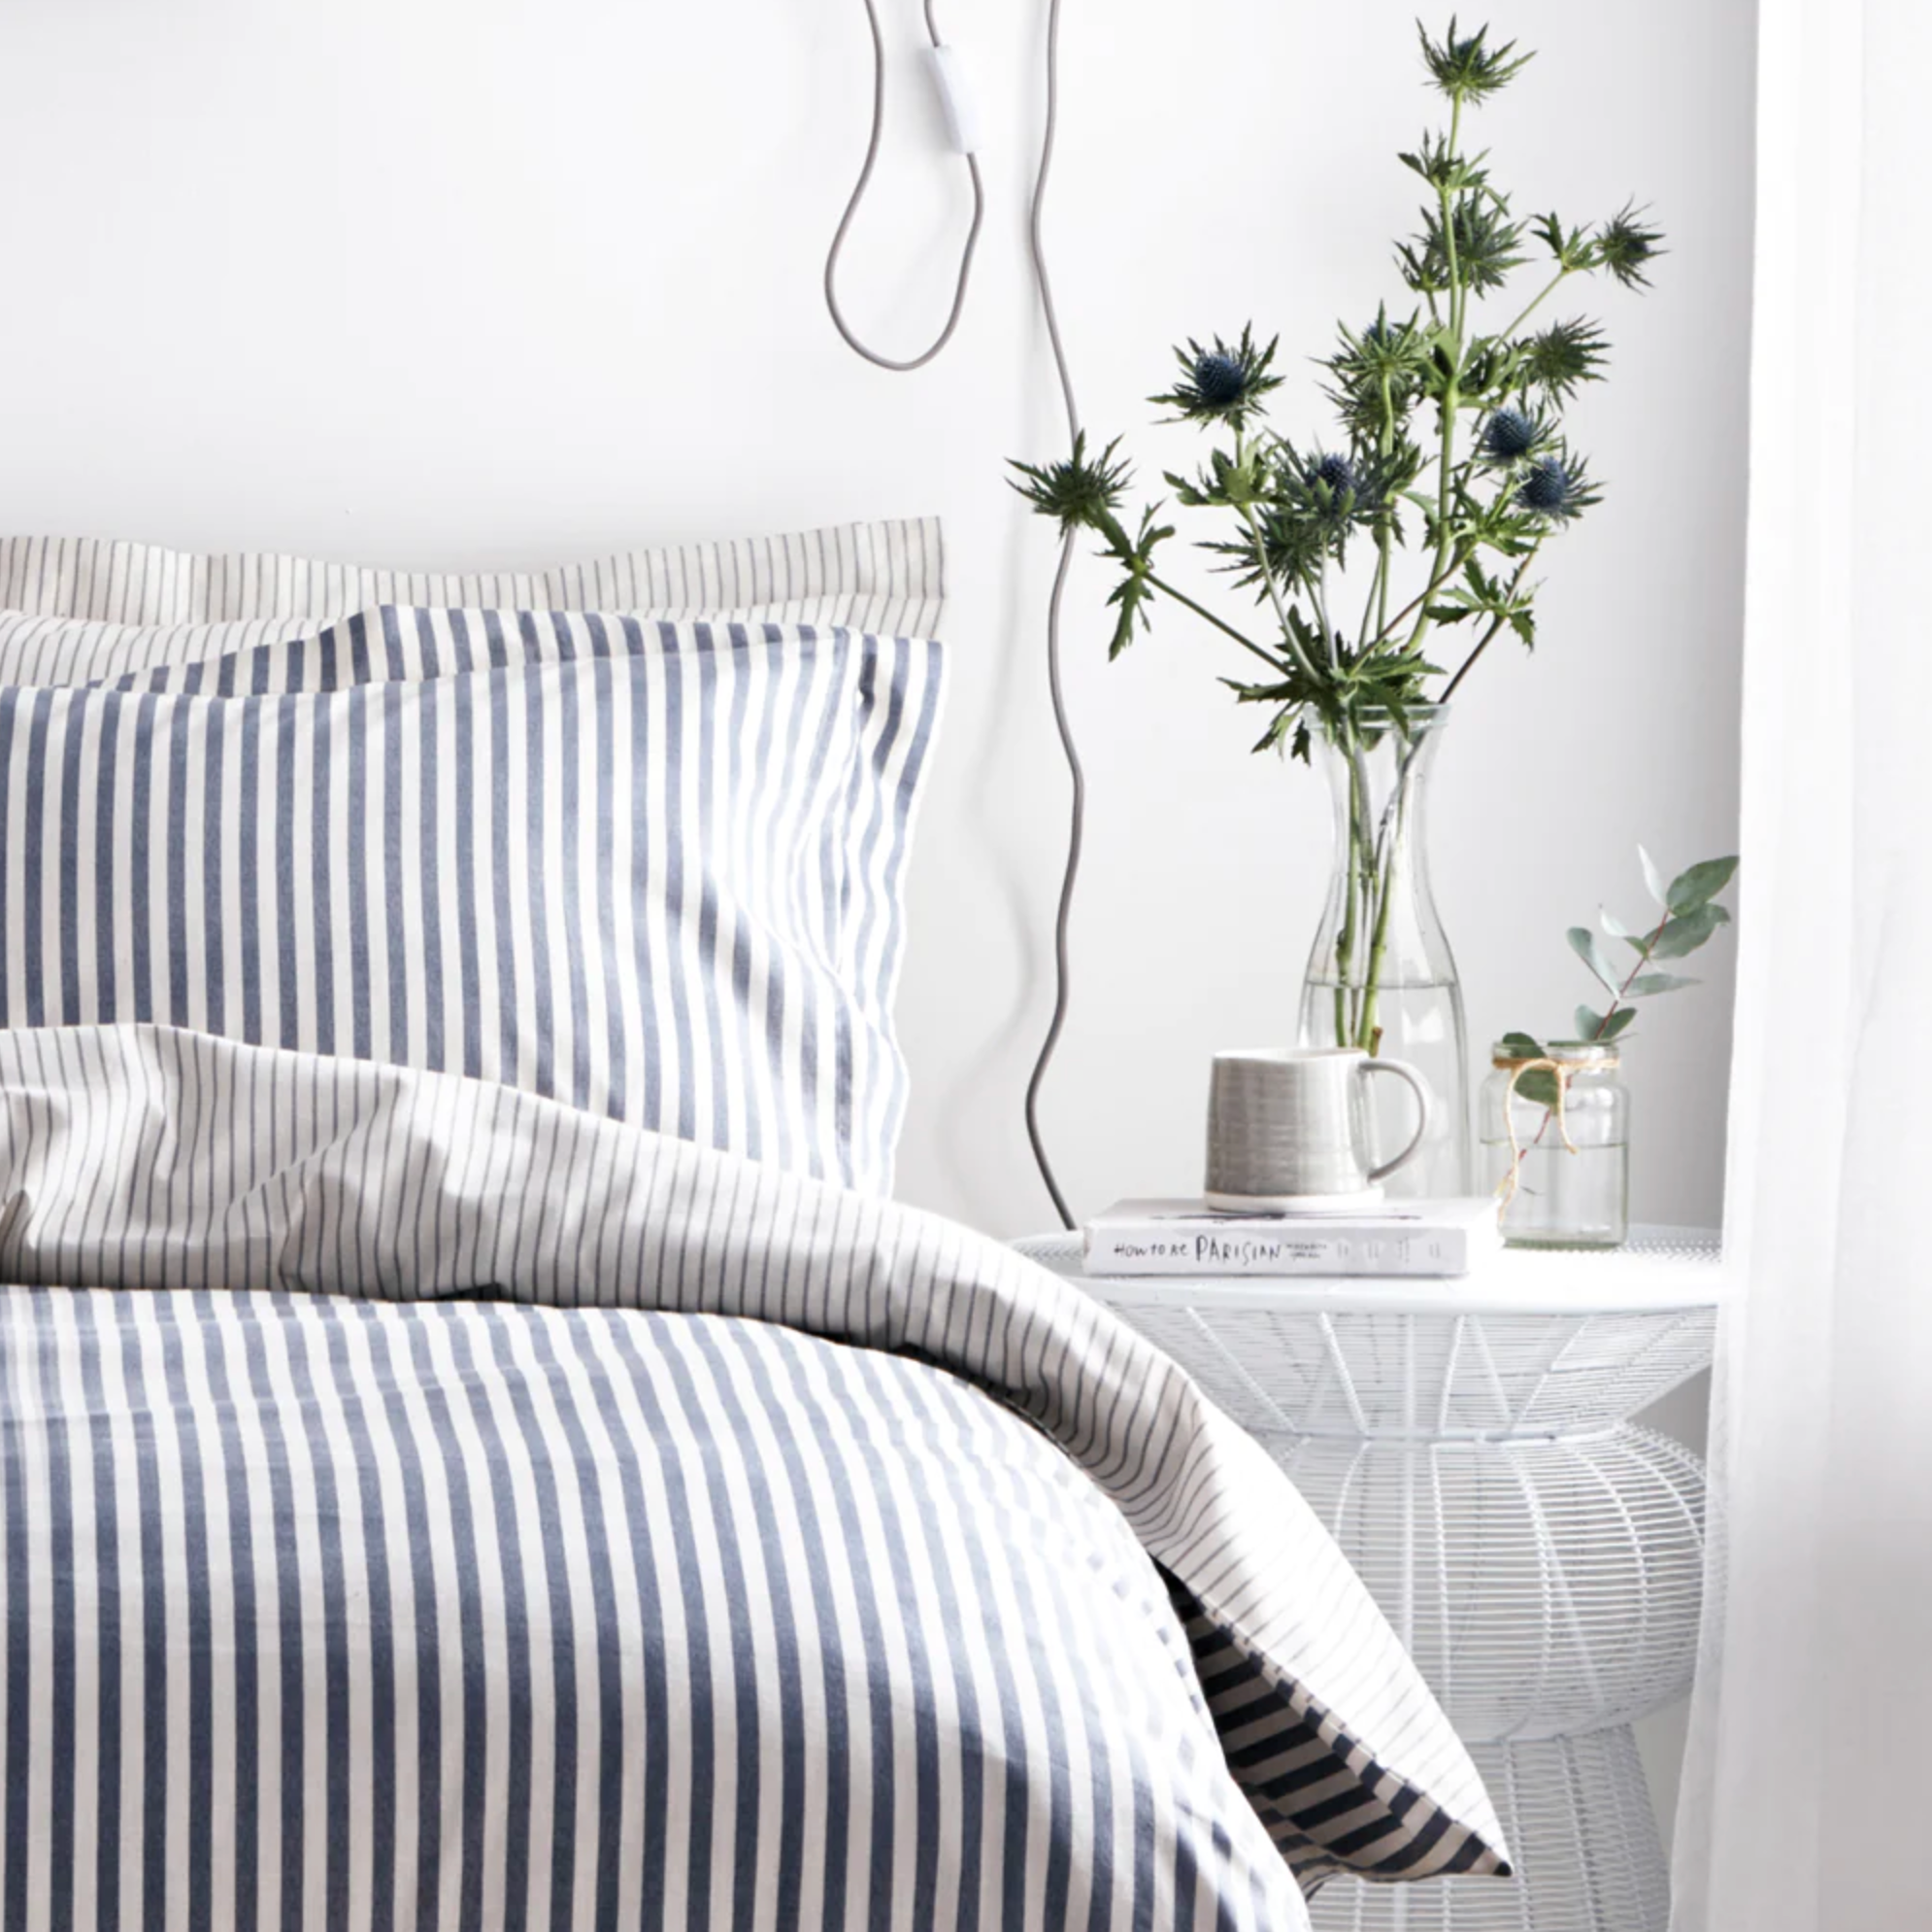 Navy Blue Bedding Set with plant.